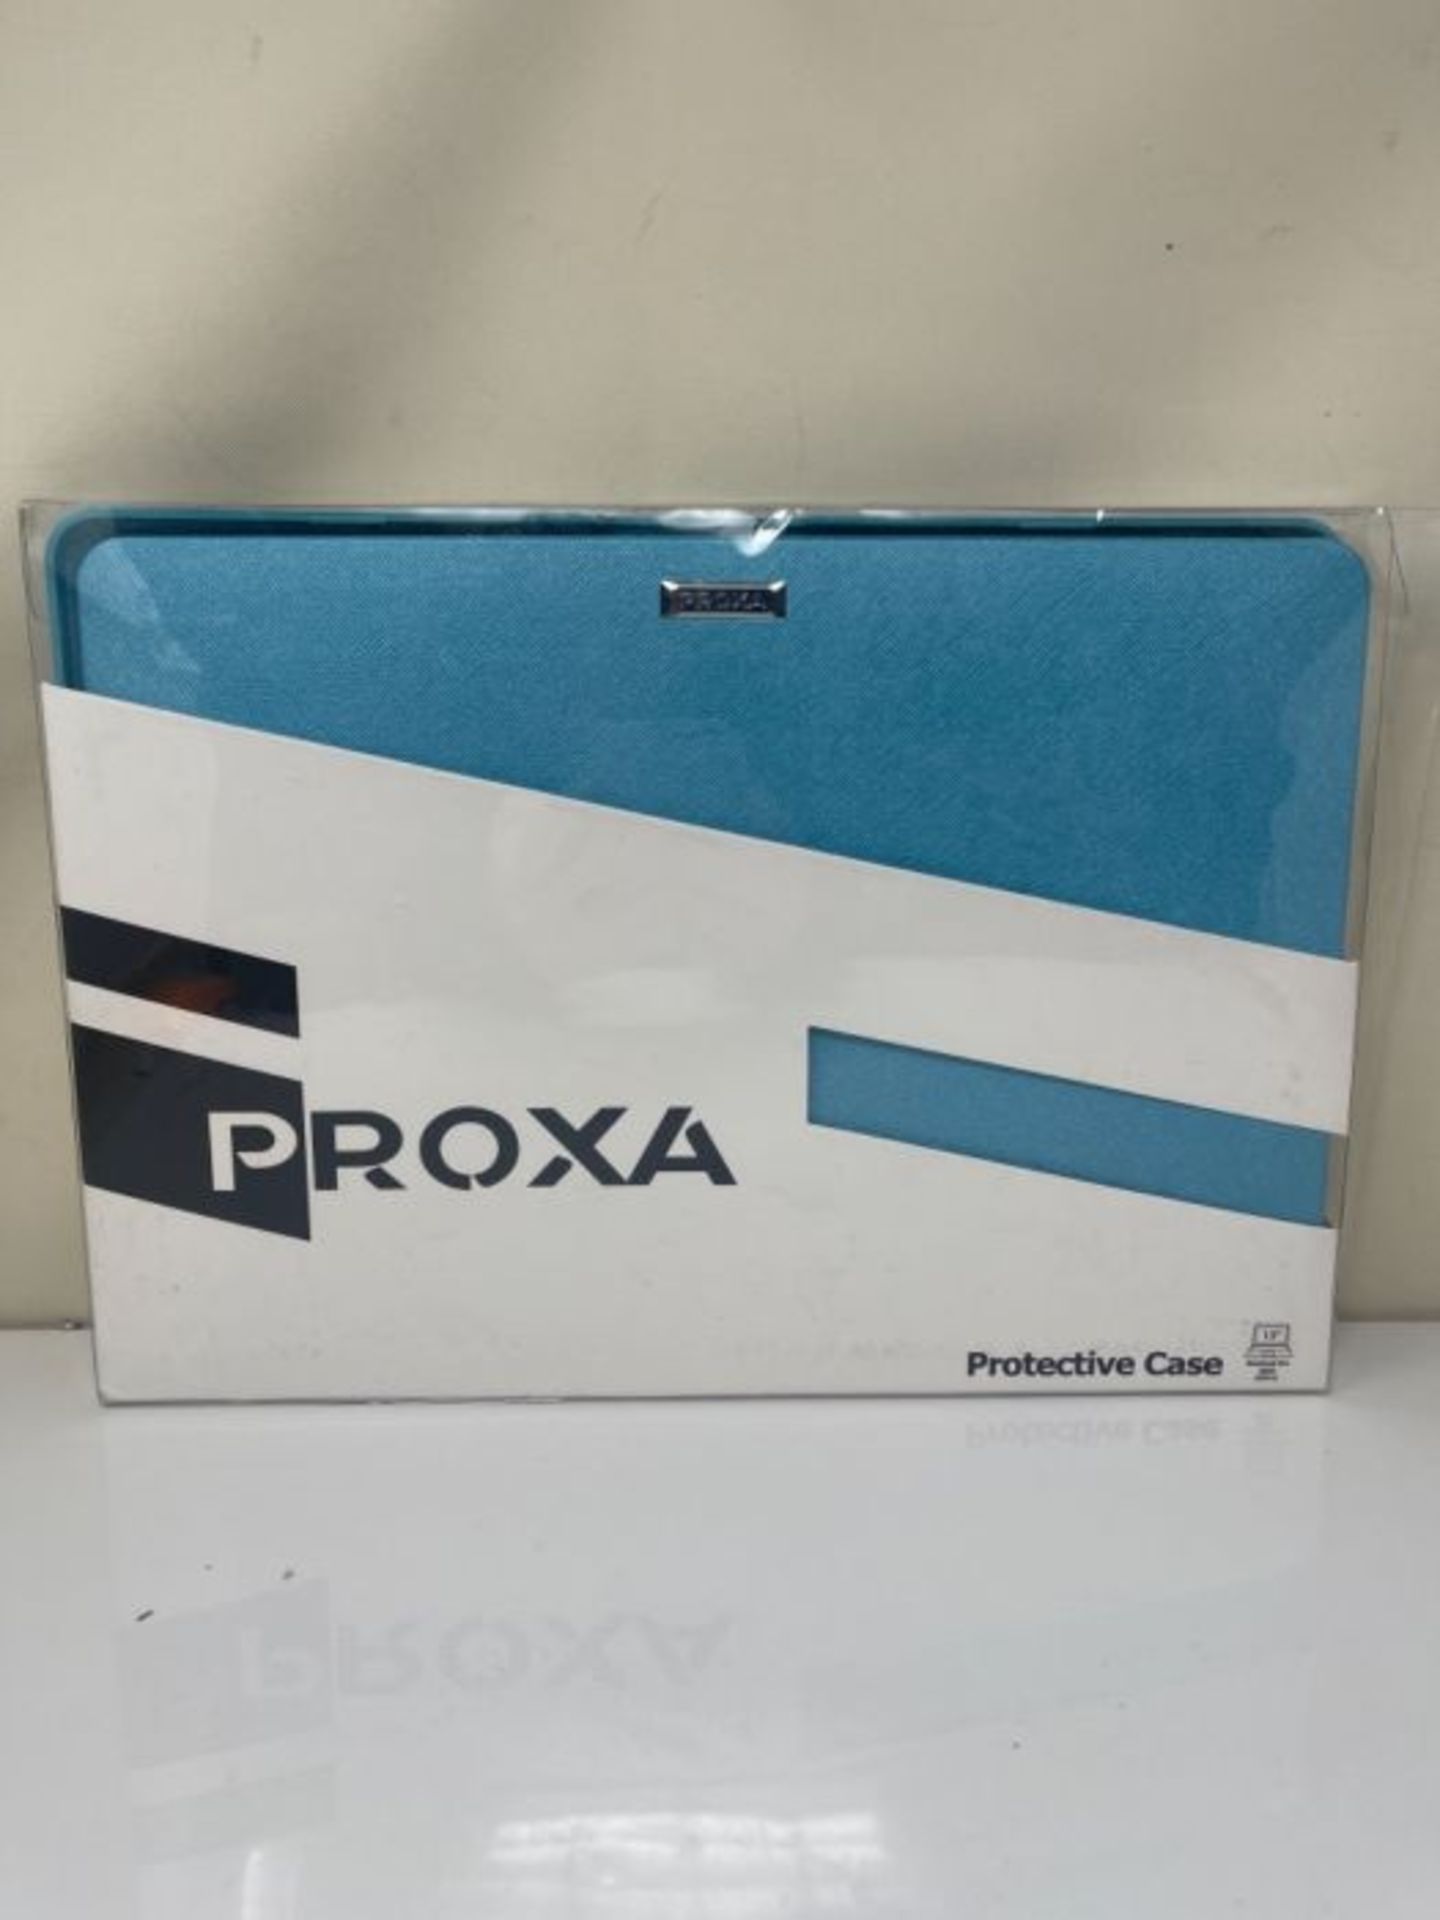 PROXA Laptop Case Compatible with MacBook Pro 13" [2020]0A2338 (M1) / A2289 / A2251? - Image 2 of 3